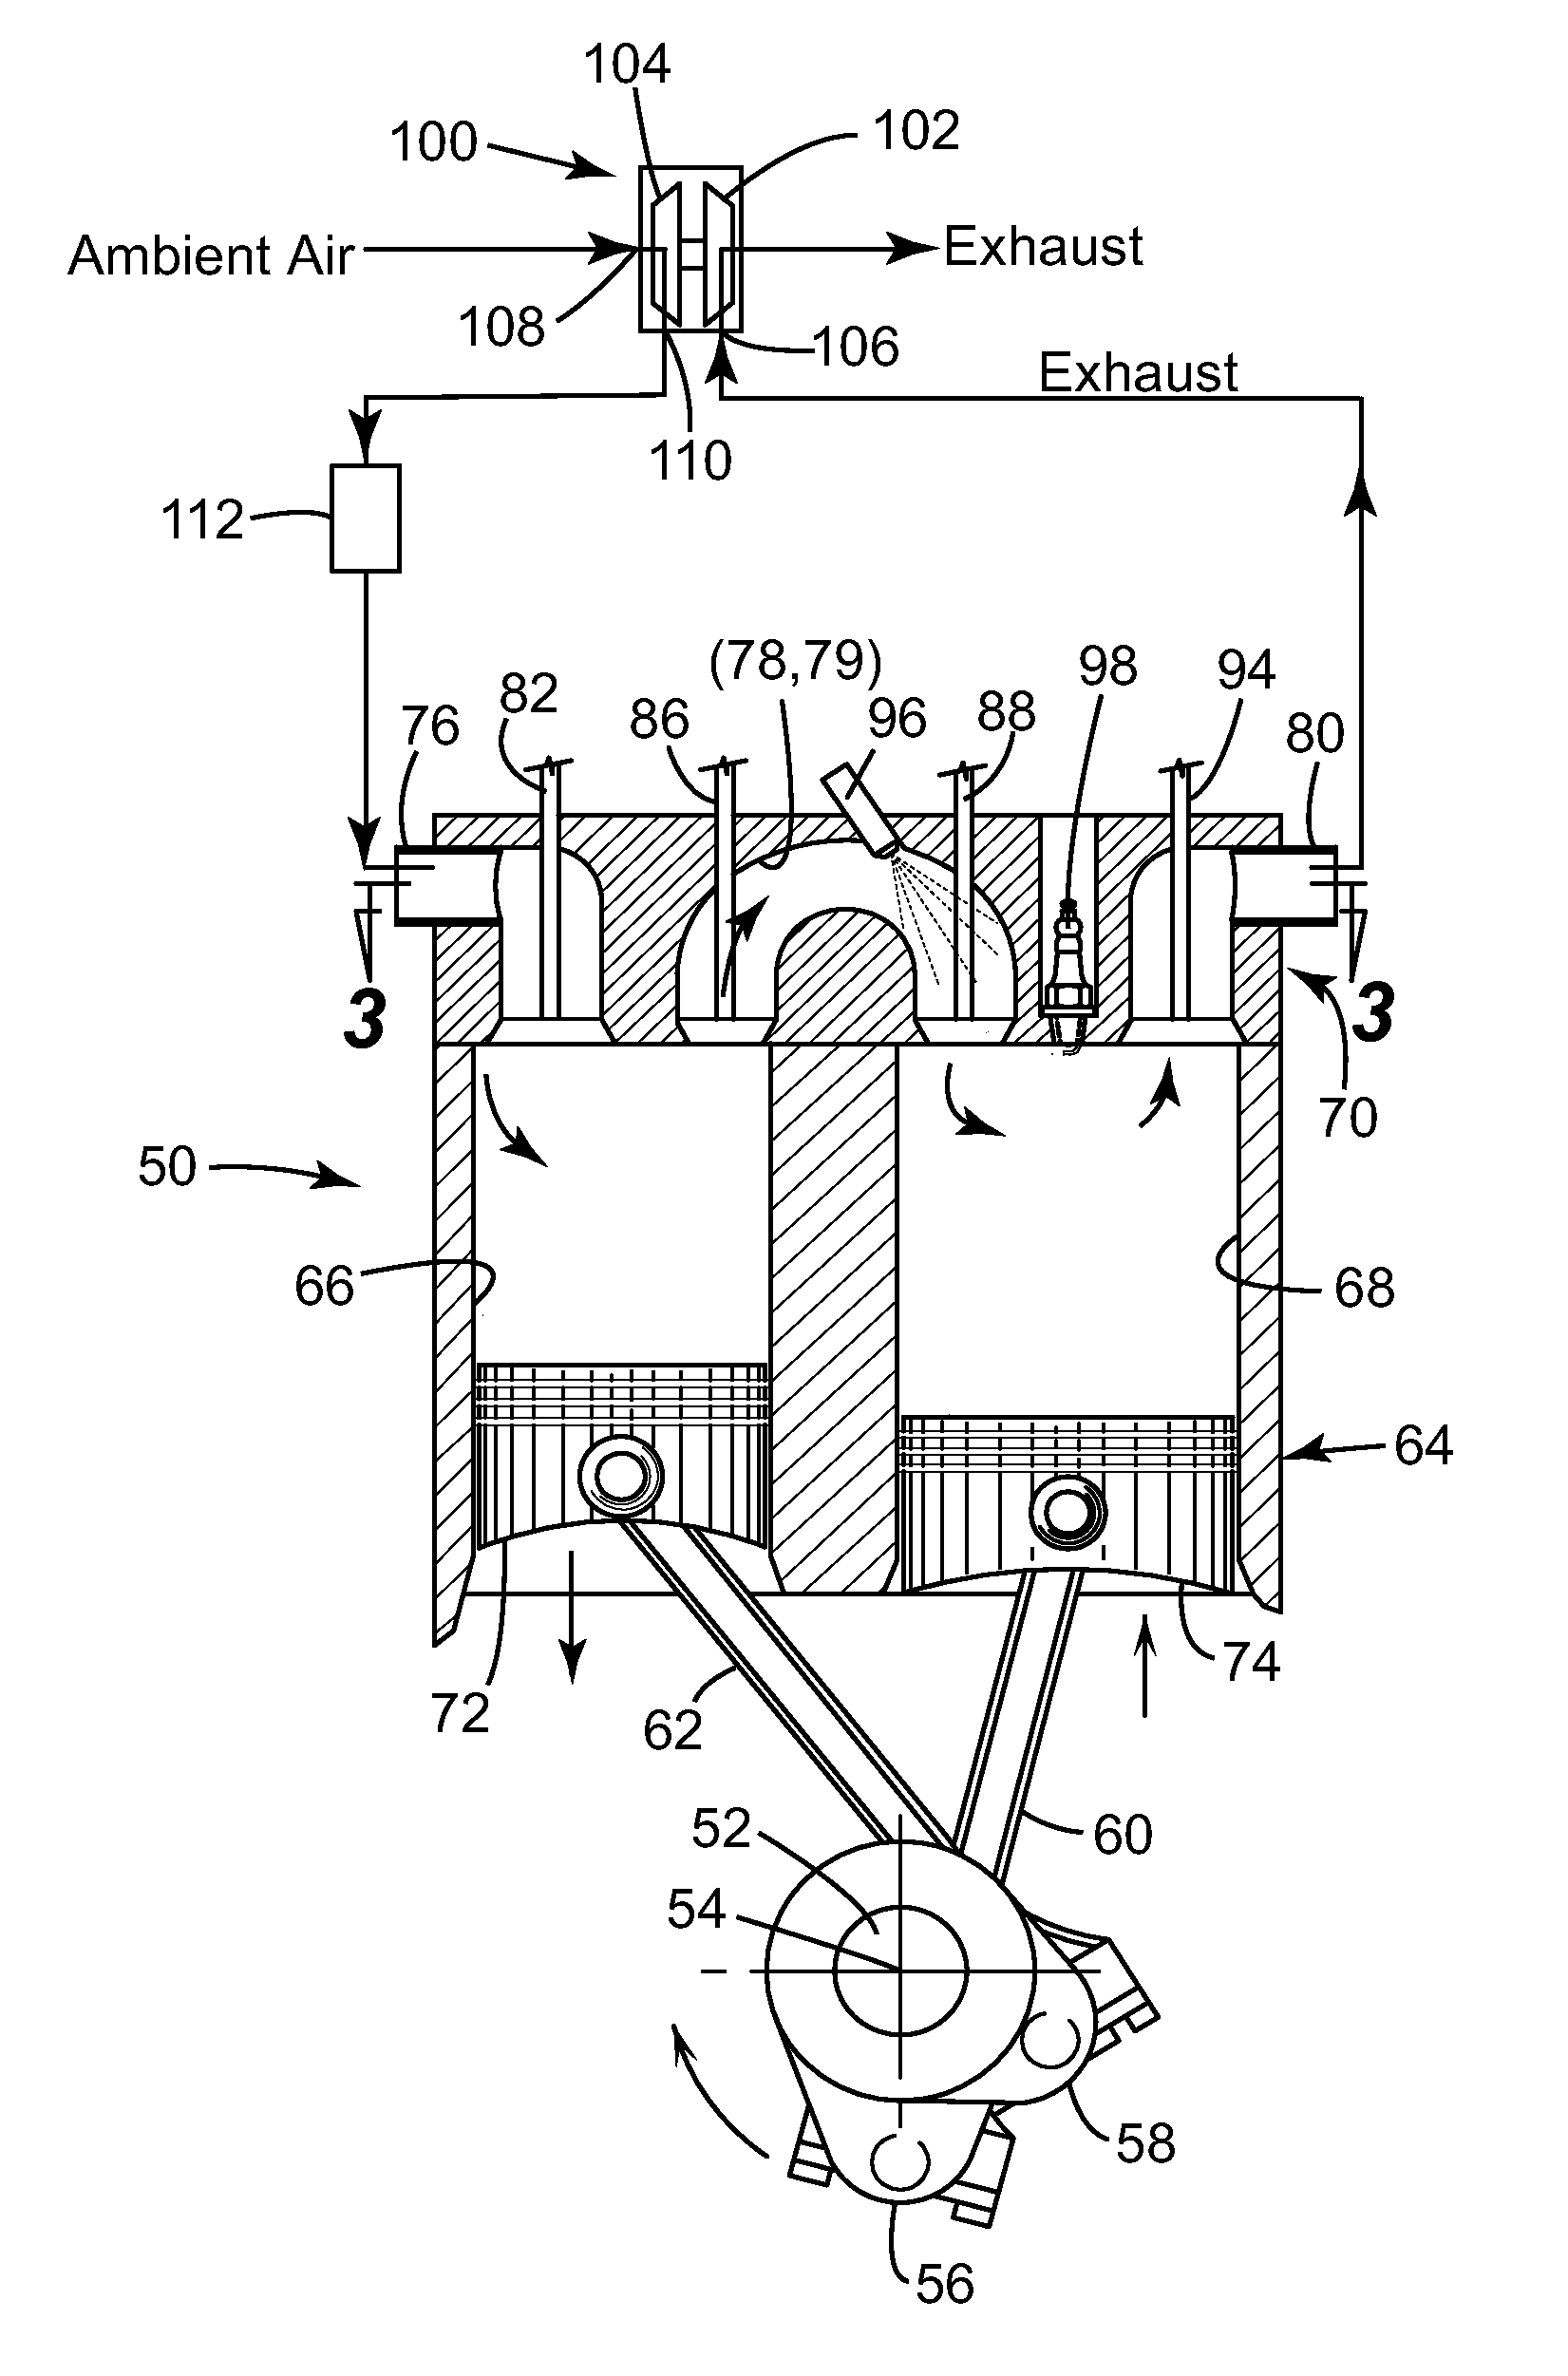 Turbocharged downsized compression cylinder for a split-cycle engine